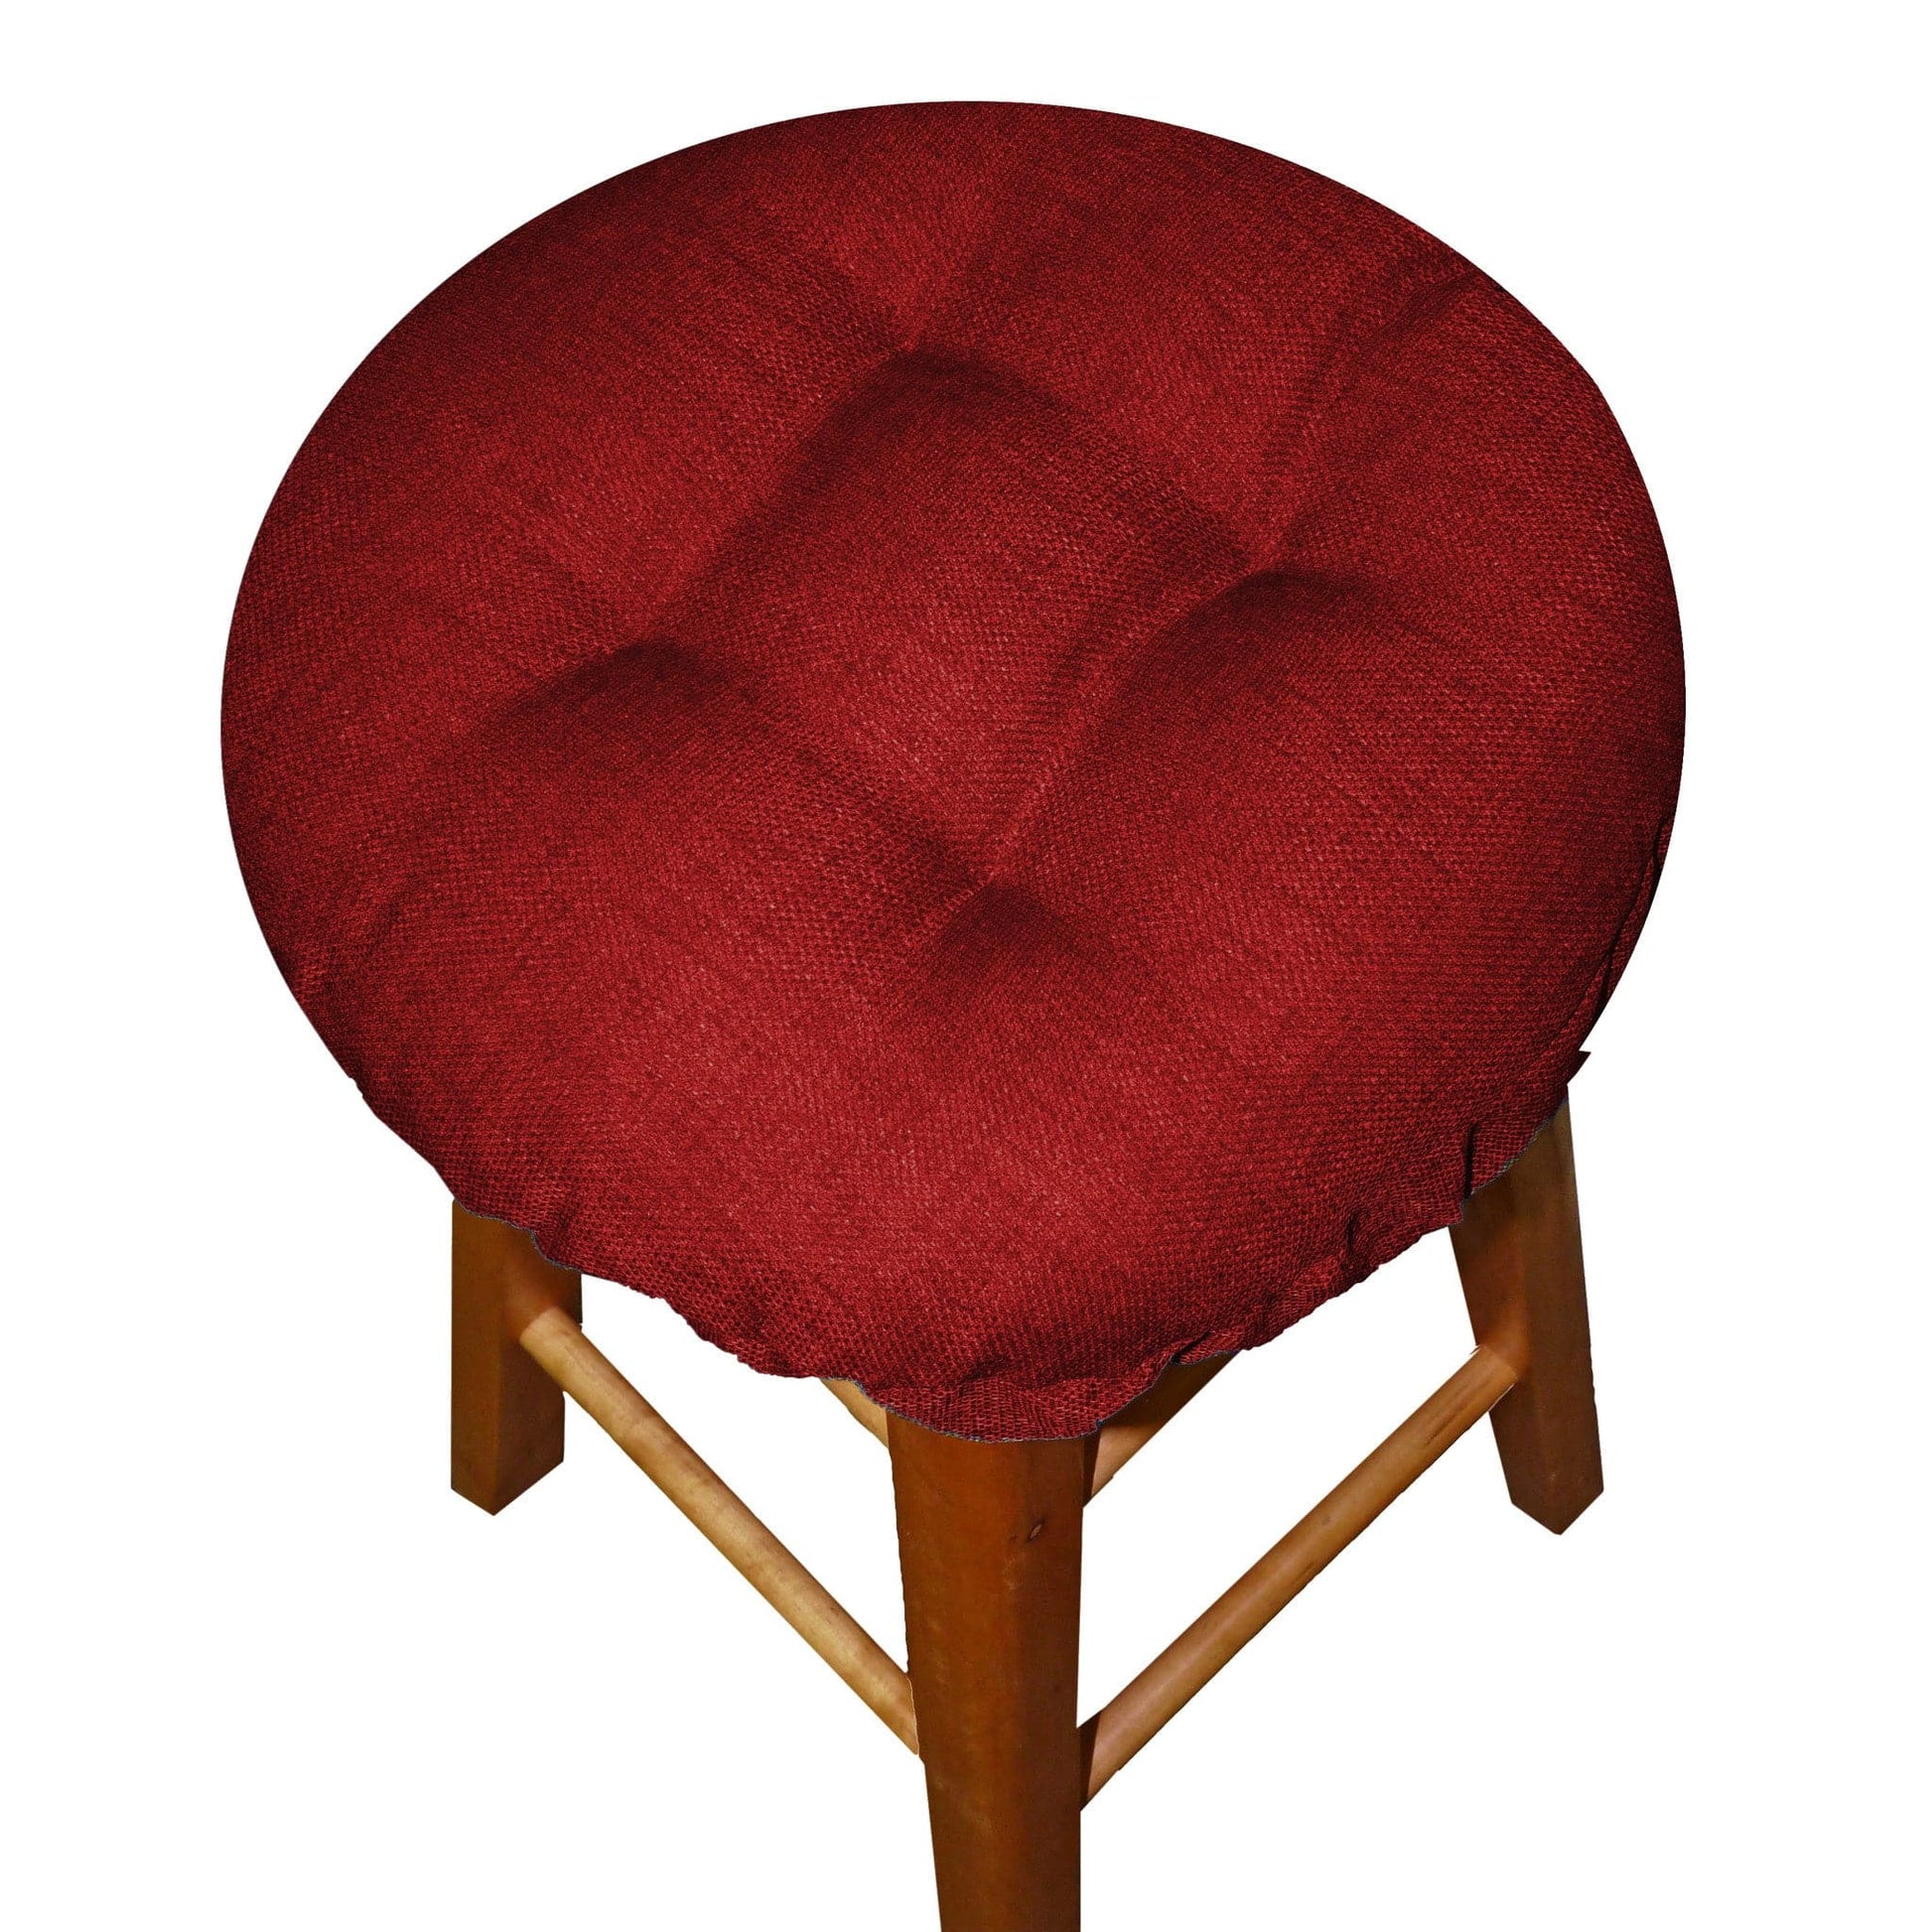 Rave Red Indoor/Outdoor Barstool Pad - Barnett Home Decor - Ruby Red